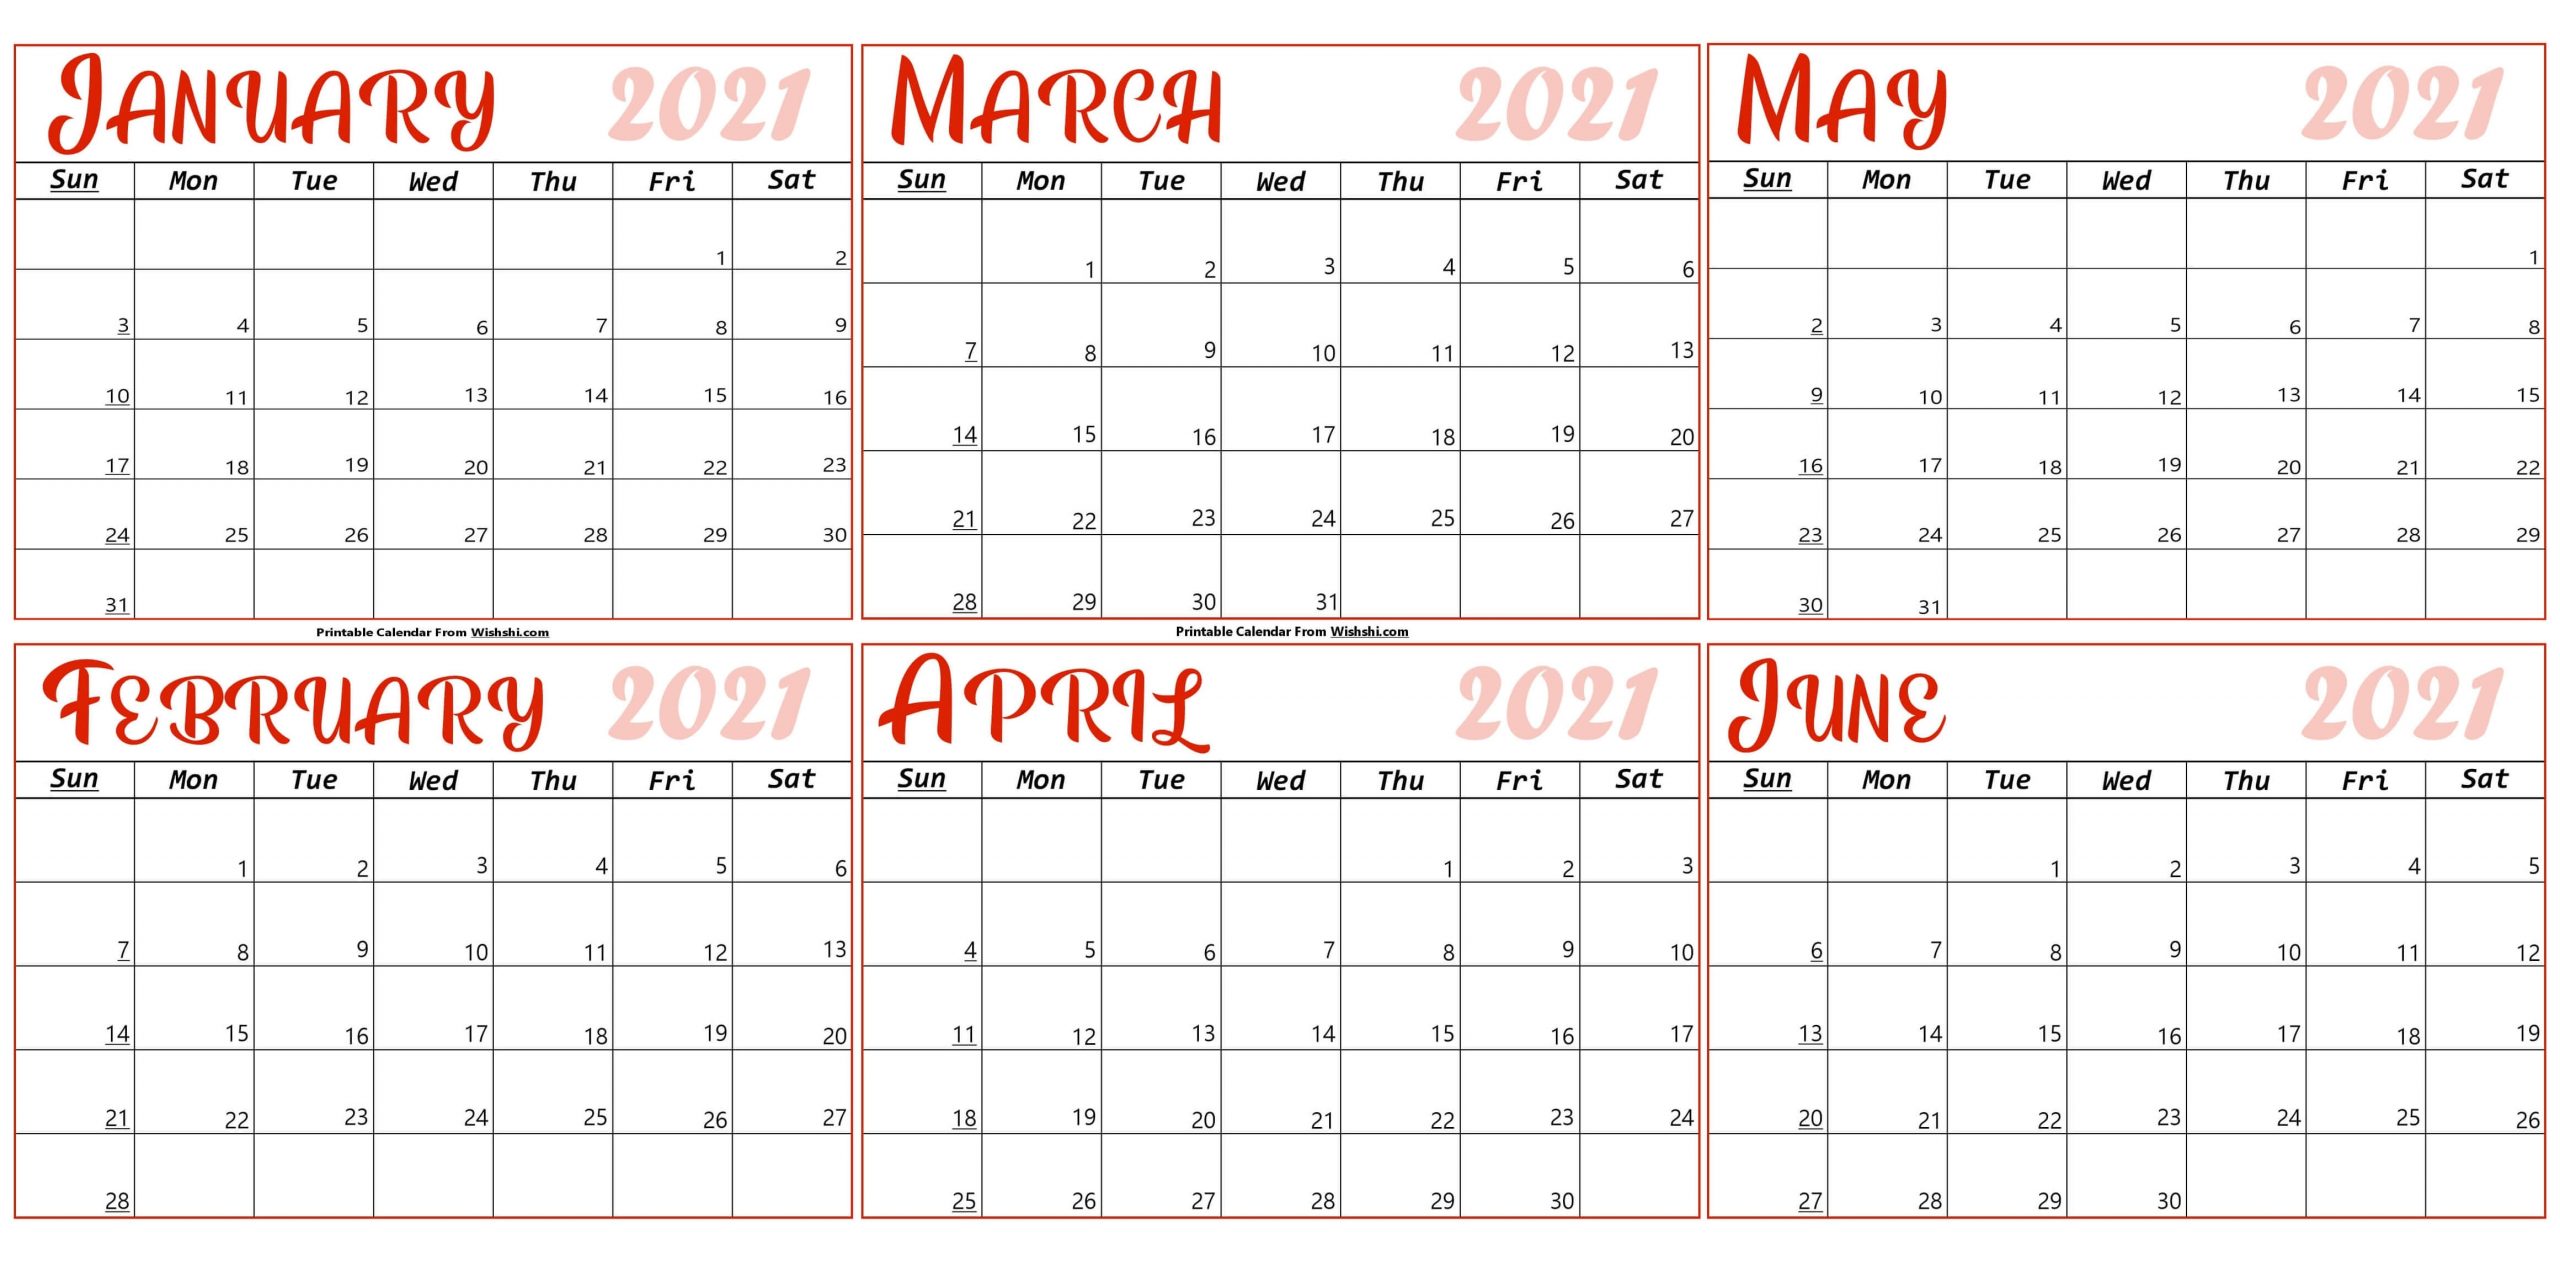 Catch Calendar Template June 2021 With Time Slots